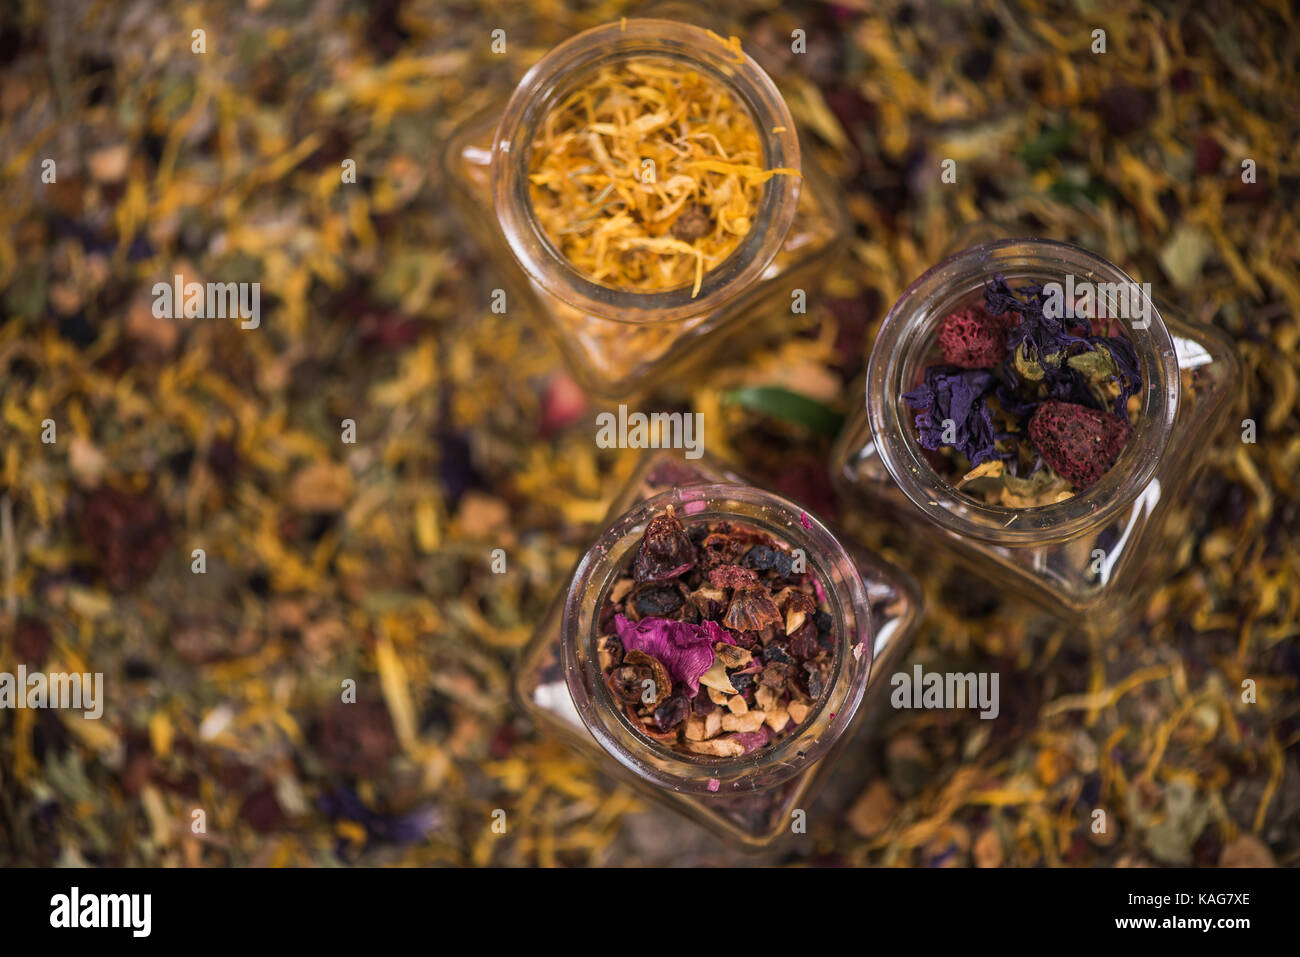 Samples Of Loose Leaves Of Green, Red, Black And Herbal Tea In Glass Jars  Stock Photo, Picture and Royalty Free Image. Image 117872349.